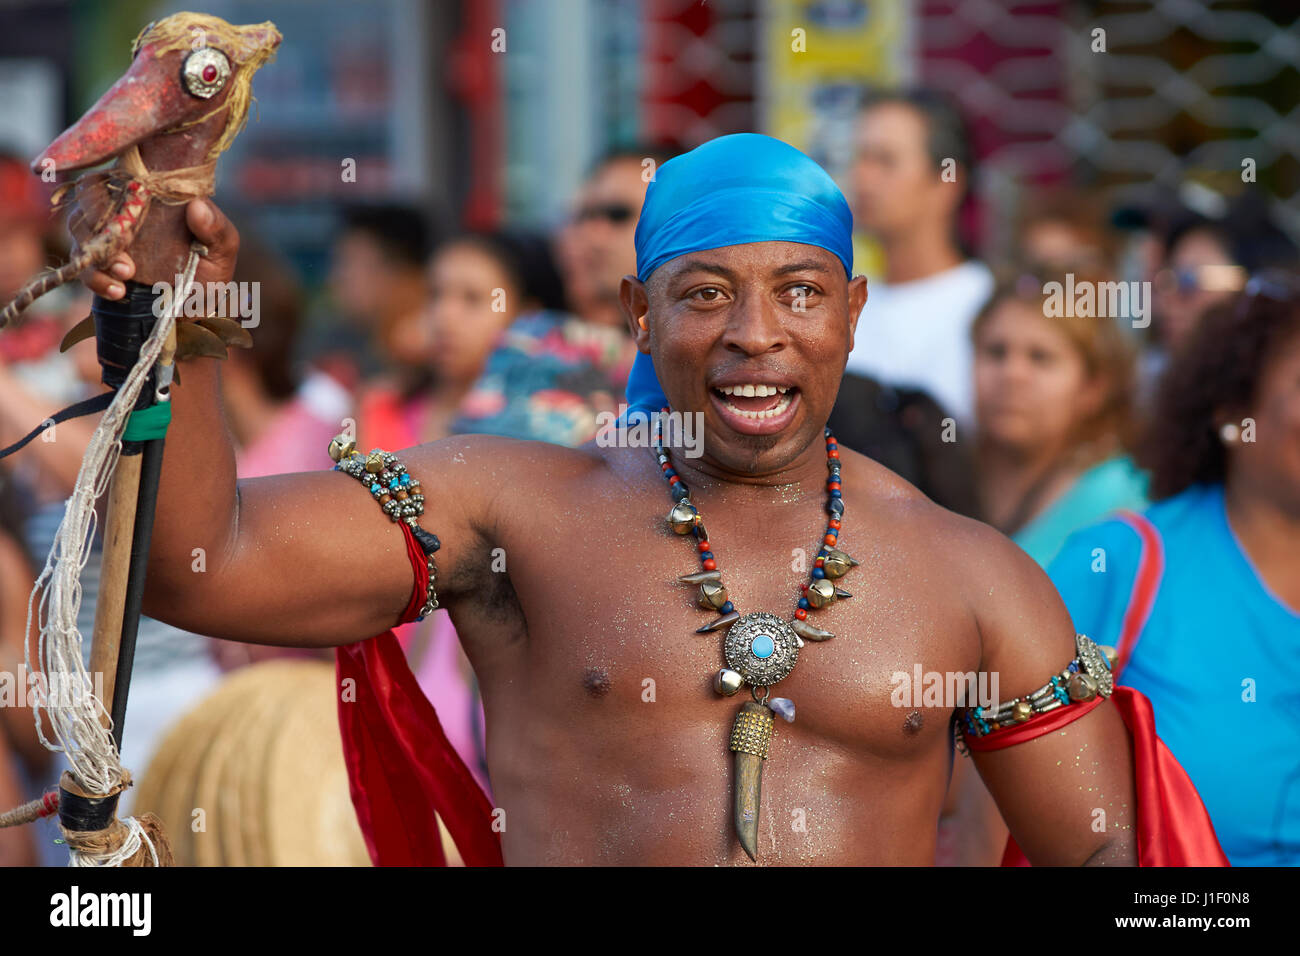 Male dancer of African descent (Afrodescendiente) performing at the annual Carnaval Andino con la Fuerza del Sol in Arica, Chile. Stock Photo